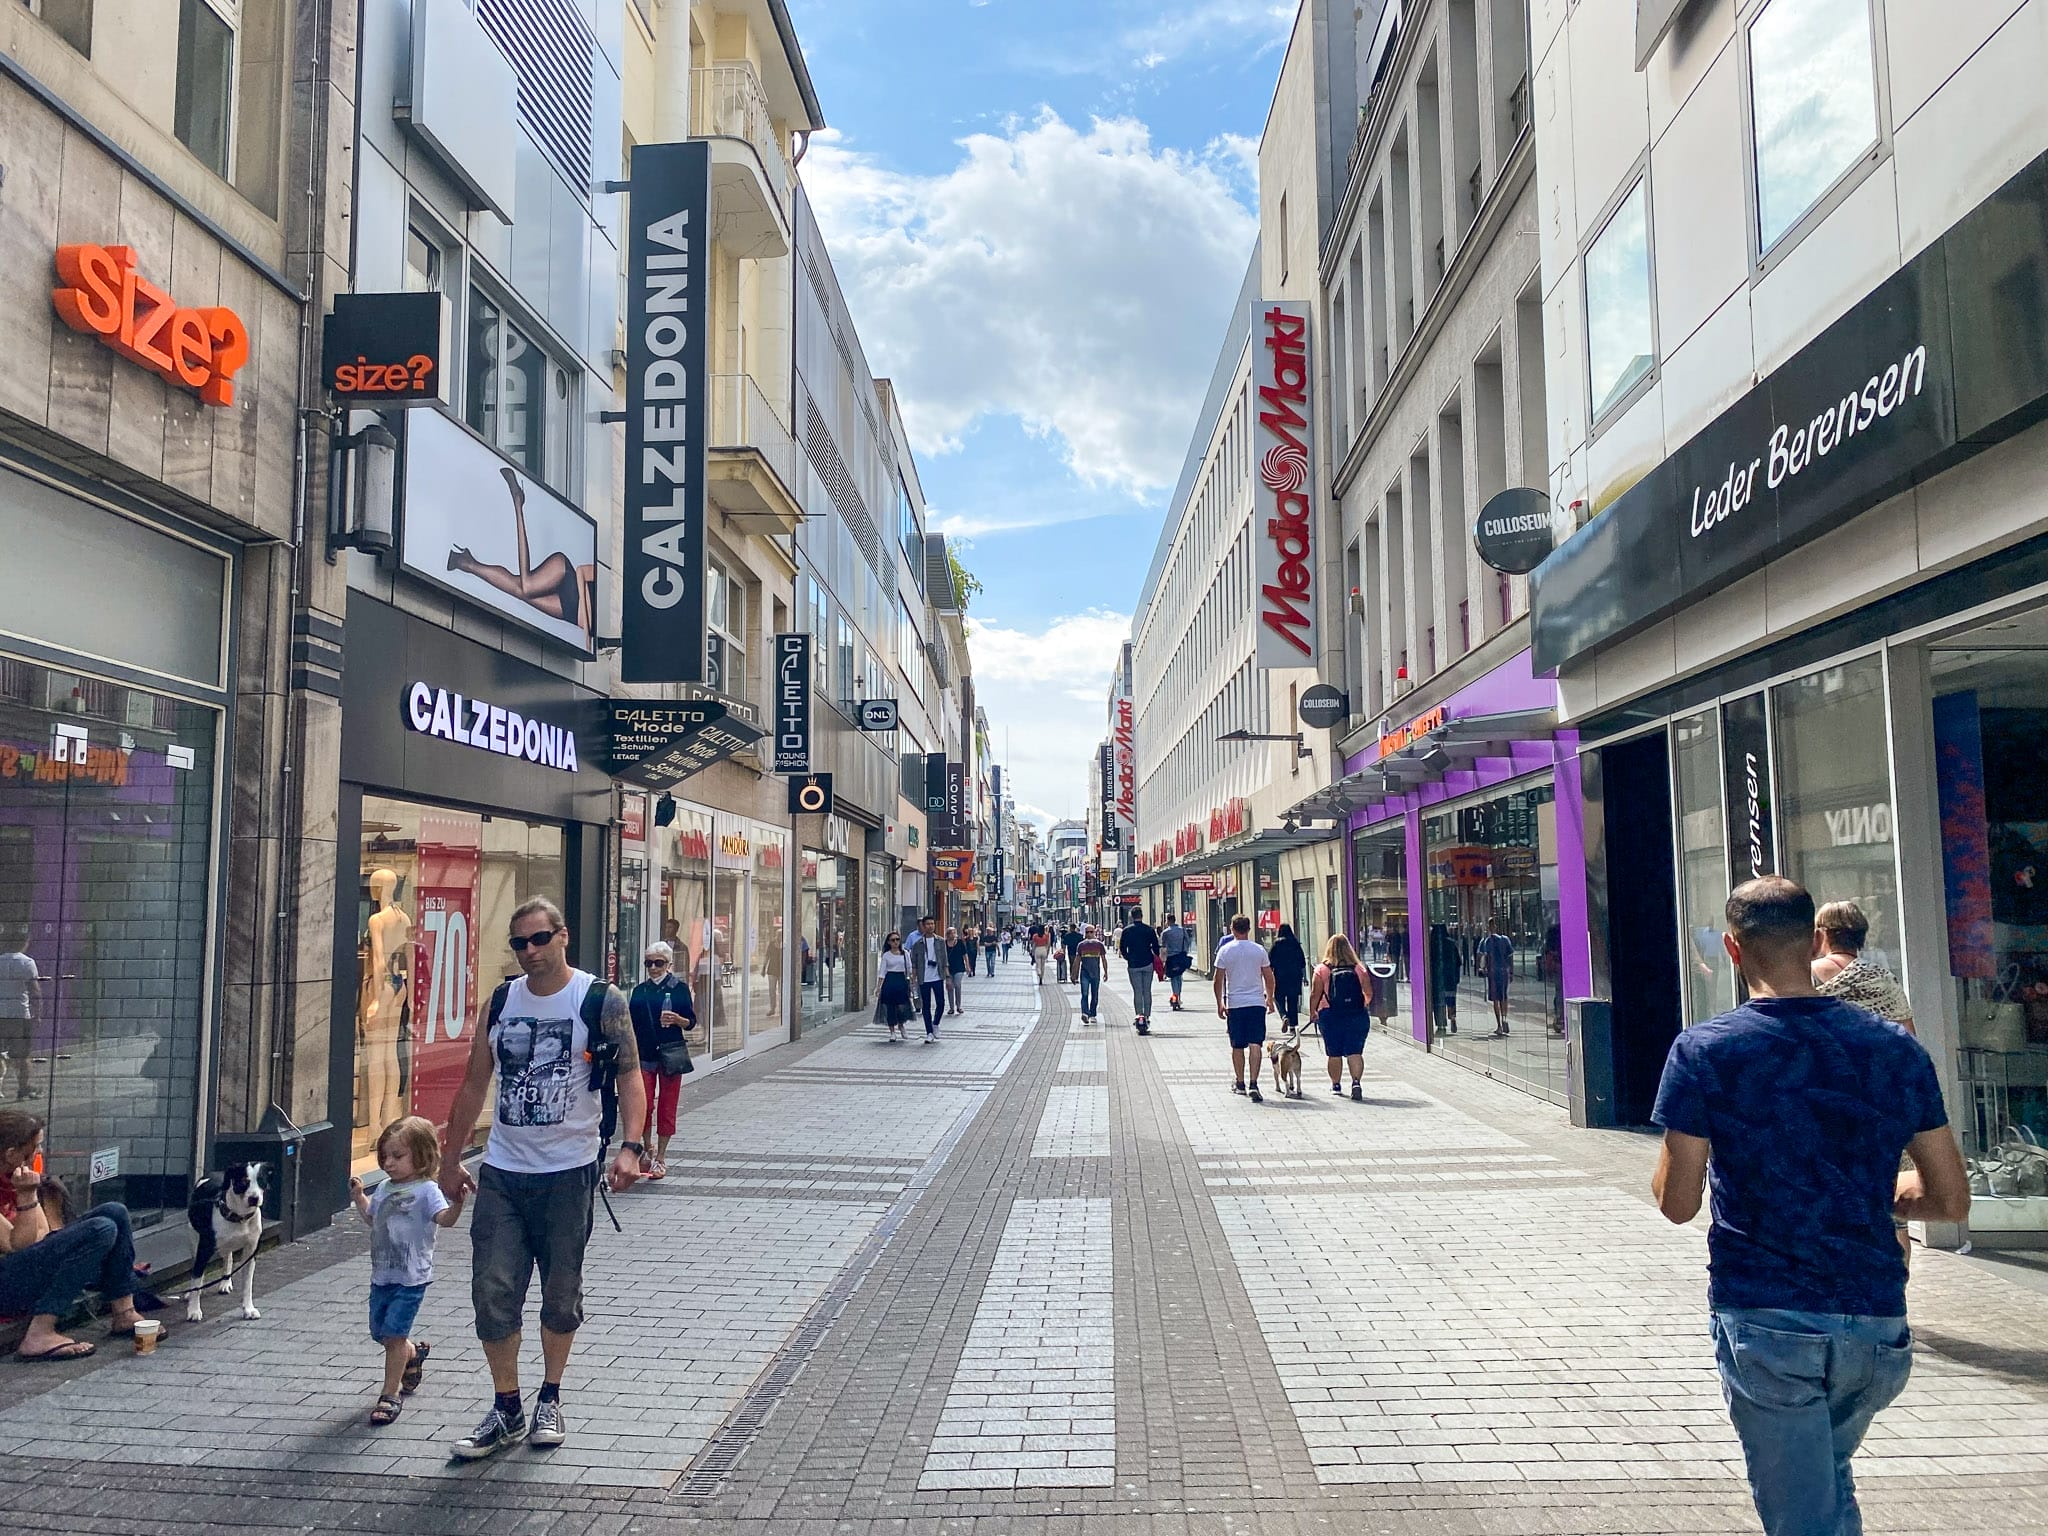 Hohe Strasse, old town cologne shopping